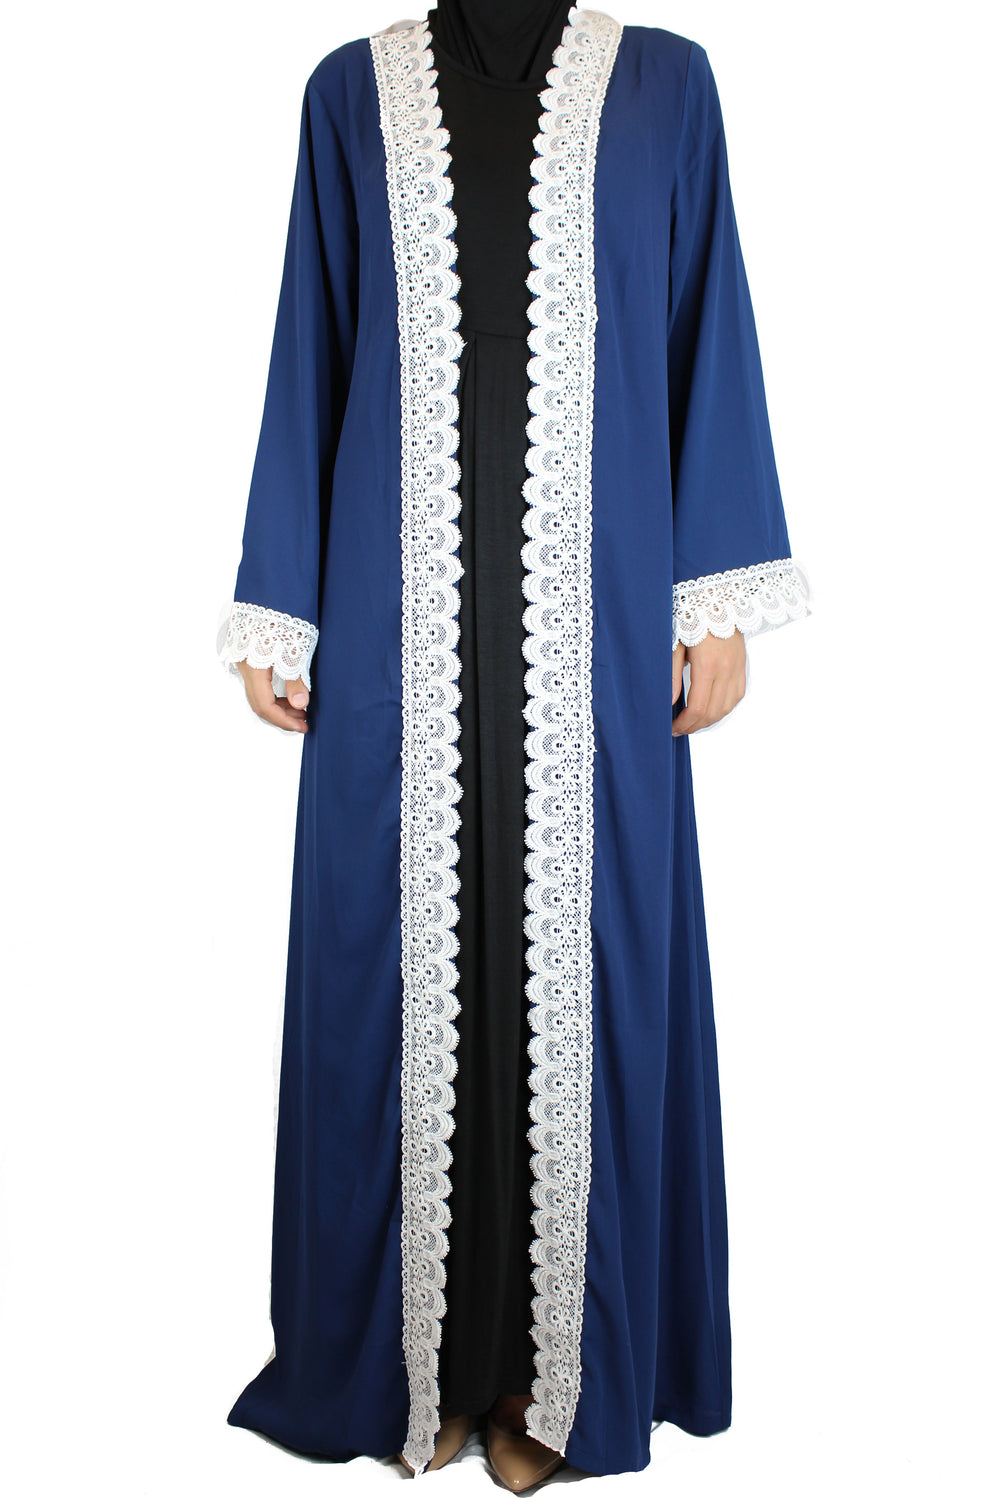 woman wearing an abaya in blue embellished with white lace sleeves